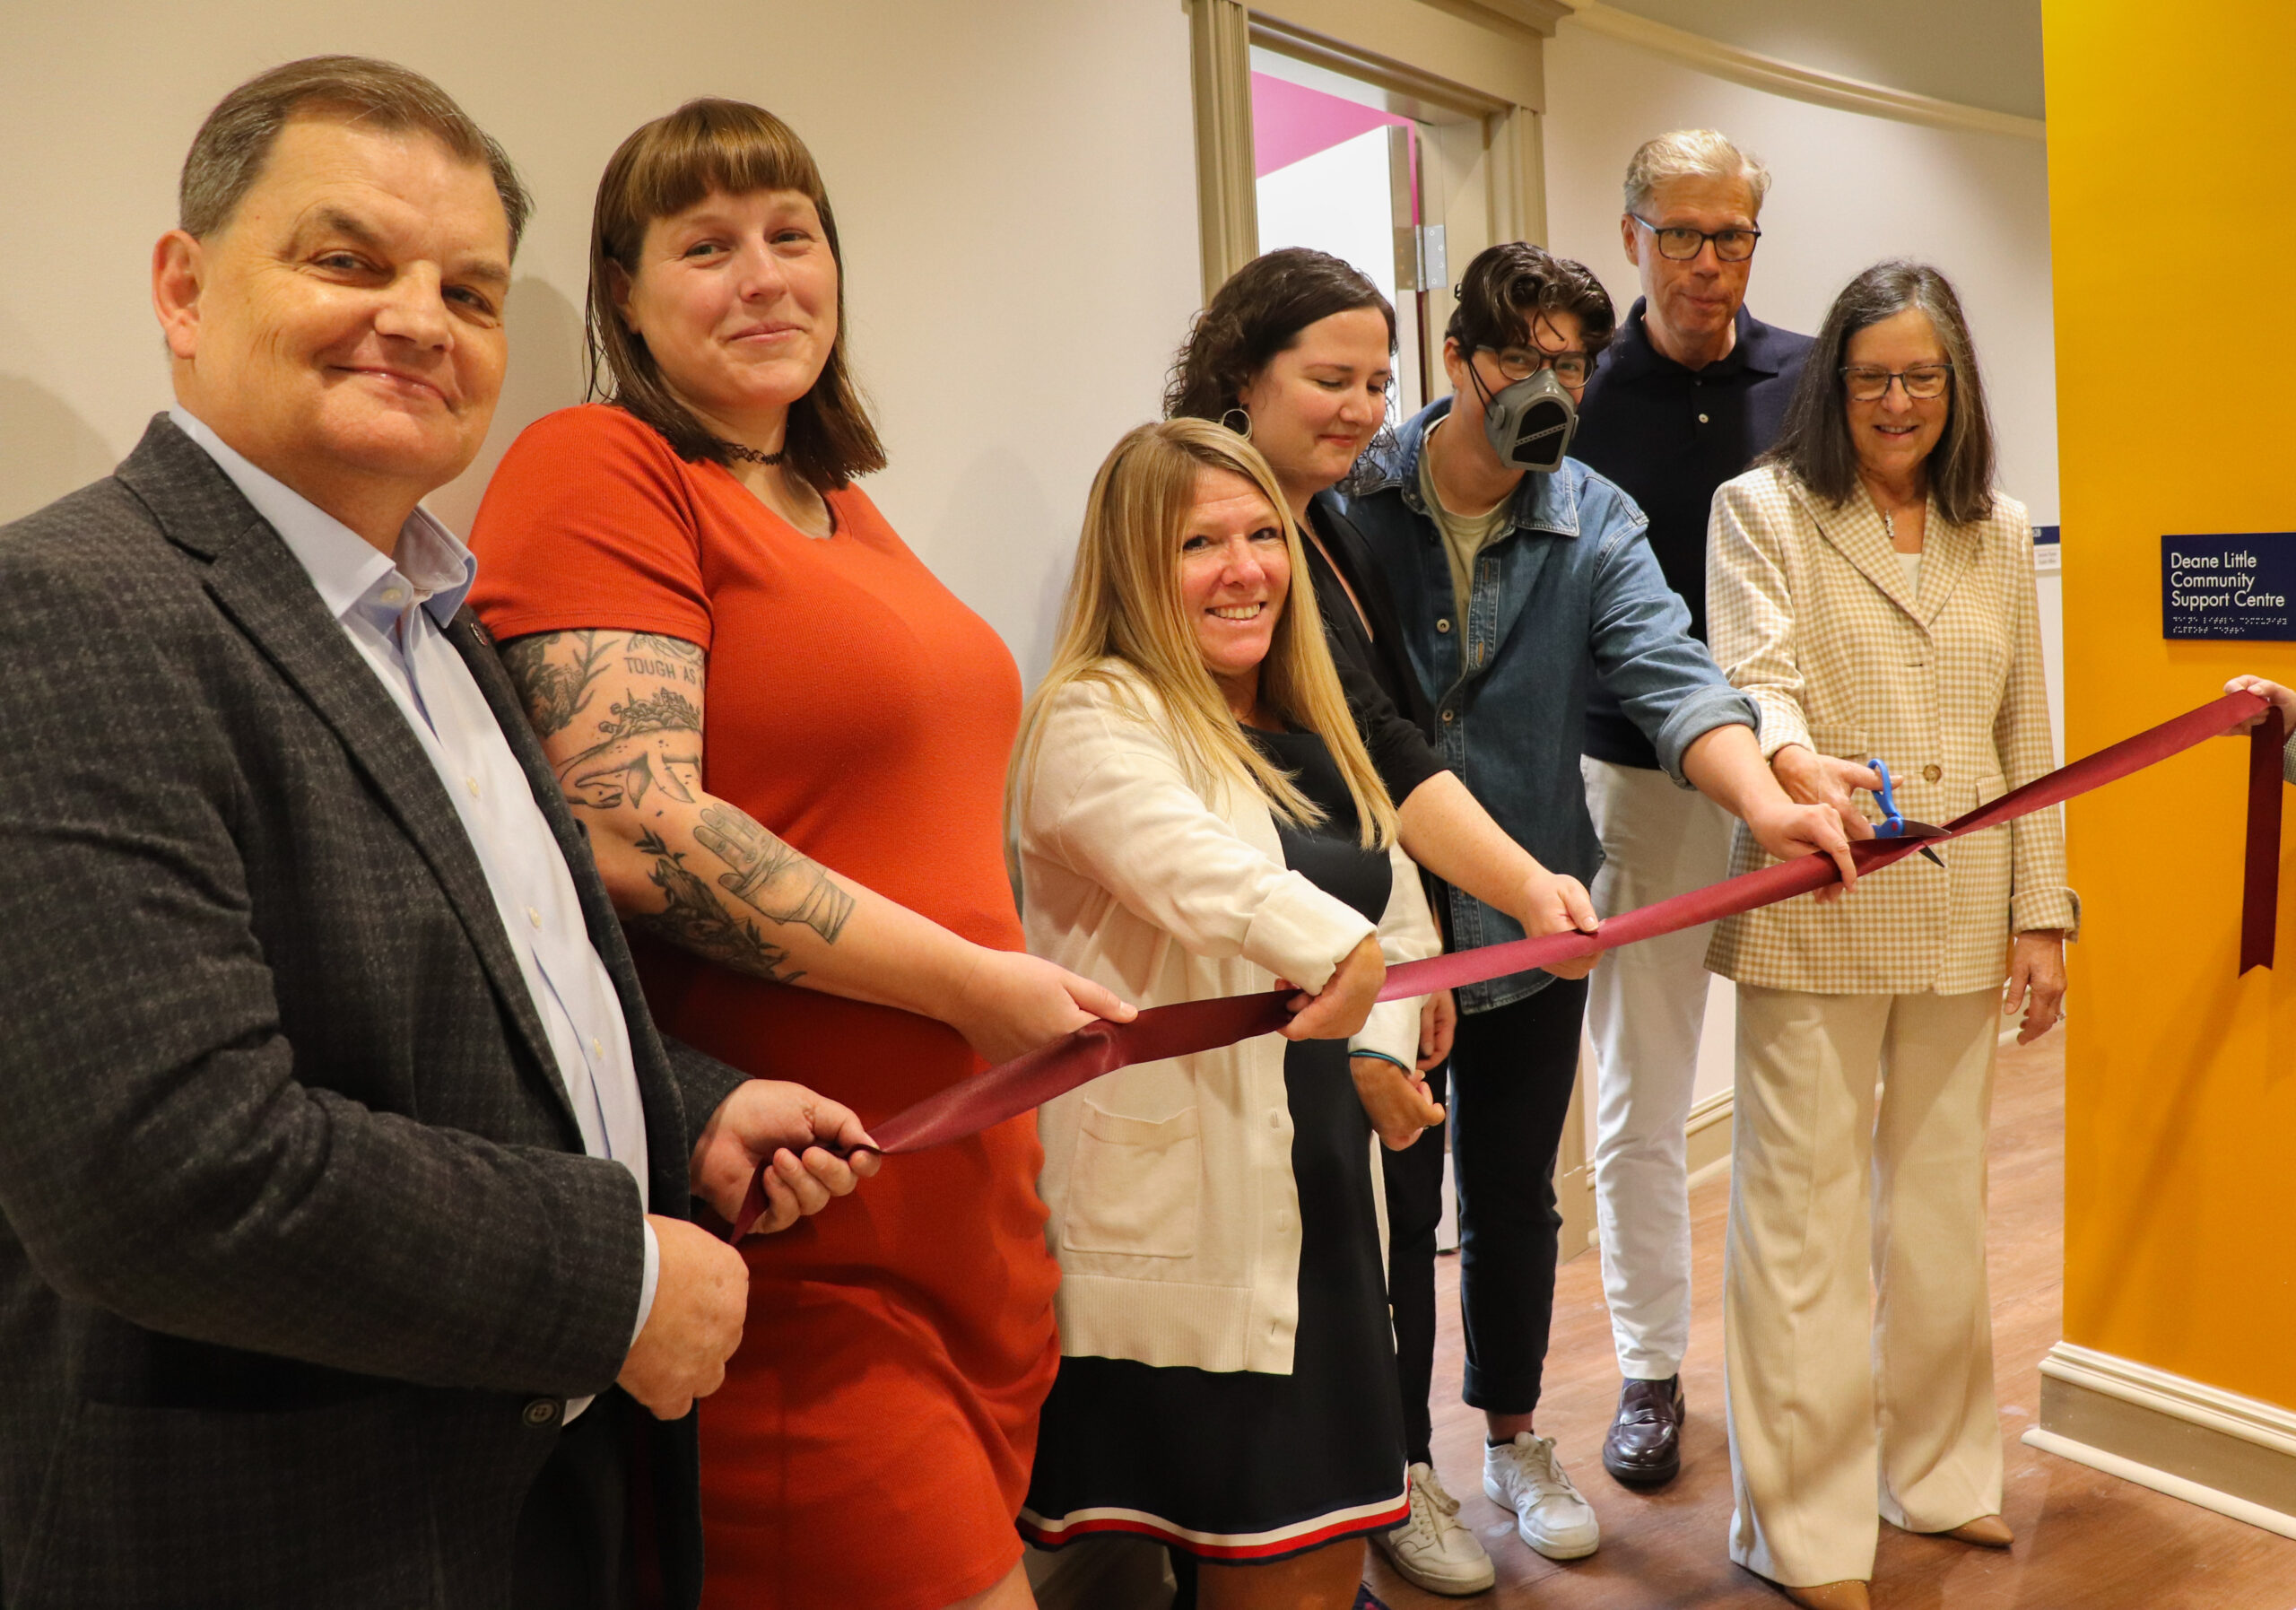 William Lahey, Jordan Roberts, Michelle Mahoney, Katie Merwin, Isaac Wright, Bob Little and Debra Deane Little hold a red ribbon as Debra cuts it in the new Deane Little Community Support Centre.